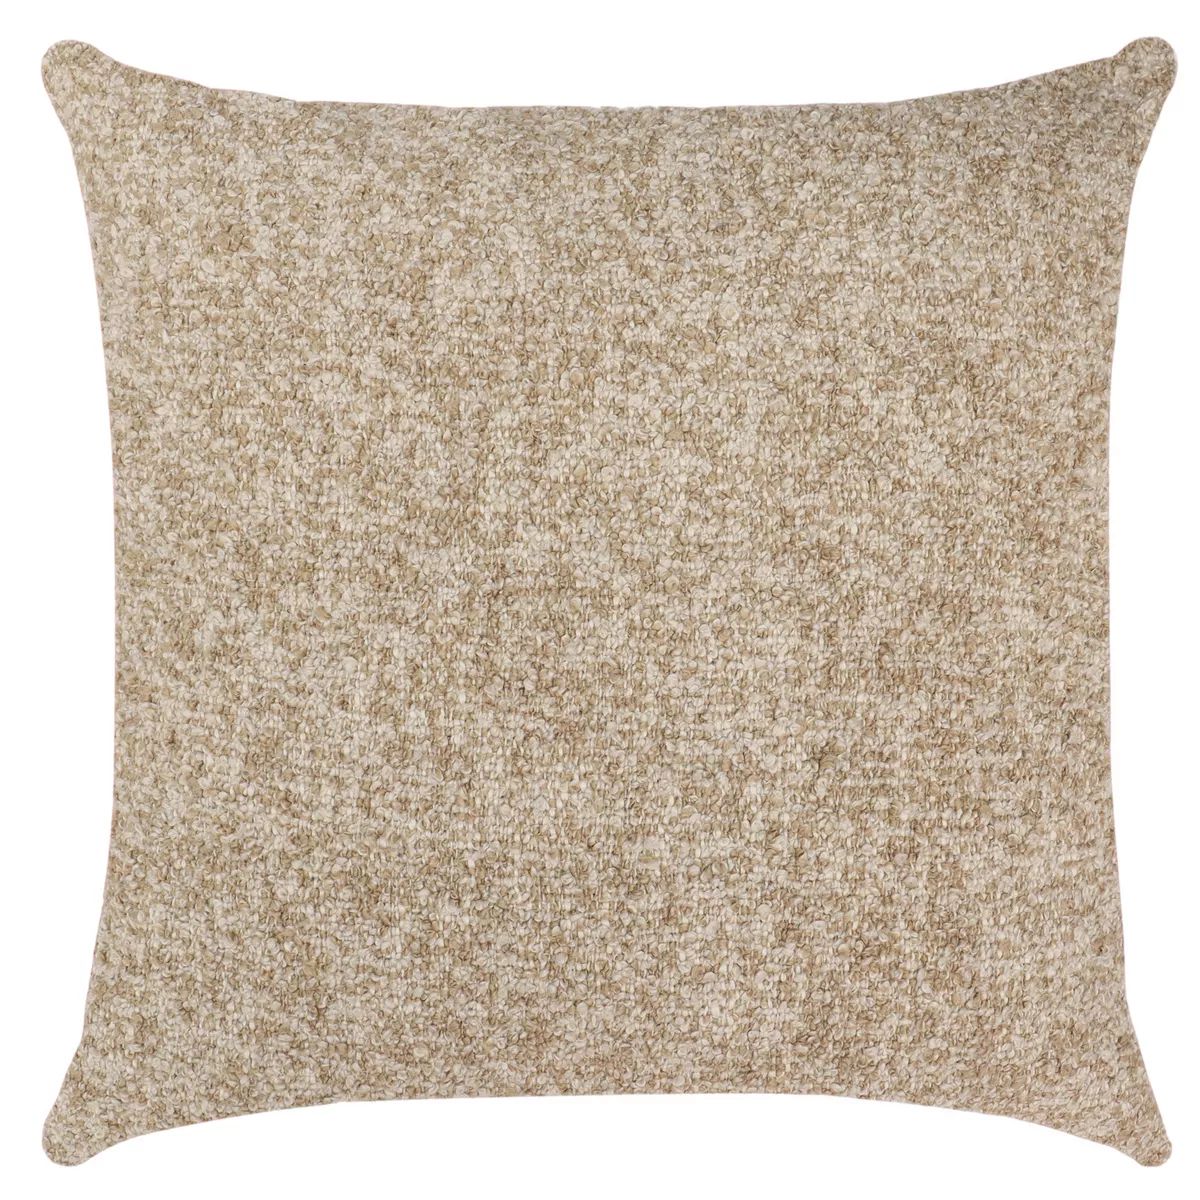 Sonoma Goods For Life® Tan Cozy Ultimate Feather Fill Throw Pillow | Kohl's